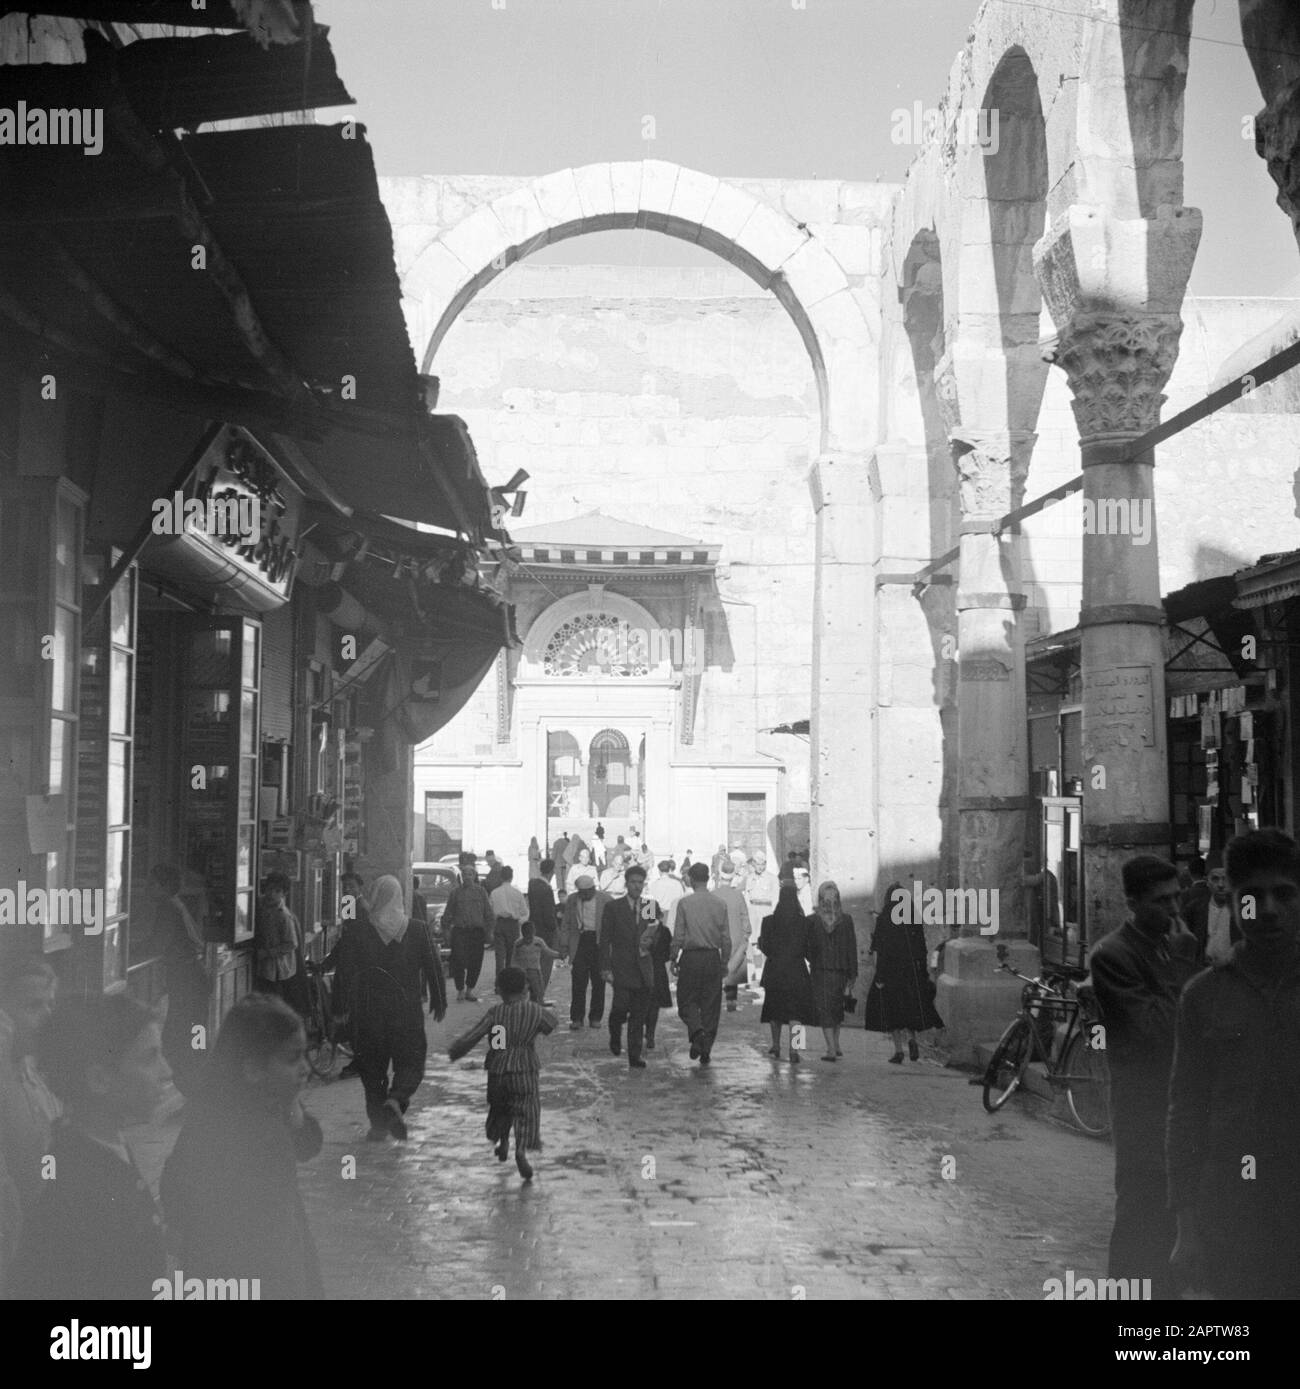 Middle East 1950-1955: Syria - Damascus  Entrance to the Omayad Mosque Date: 1950 Location: Damascus, Syria Keywords: mosques, gates Institution name: Omayyade Mosque Stock Photo